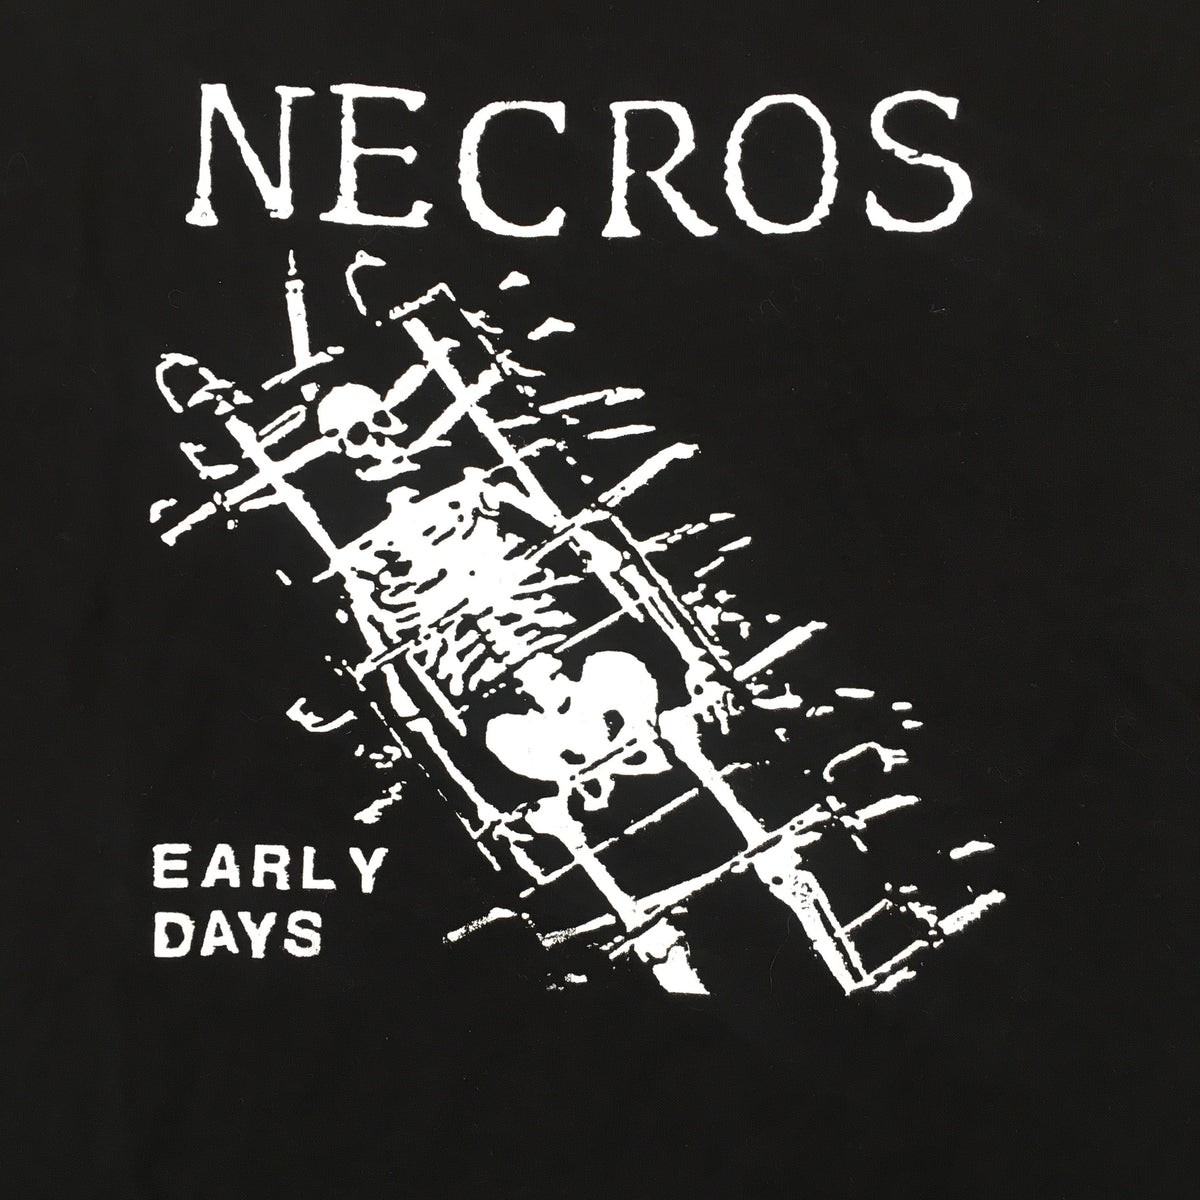 Vintage Necros &quot;Early Days&quot; T-Shirt